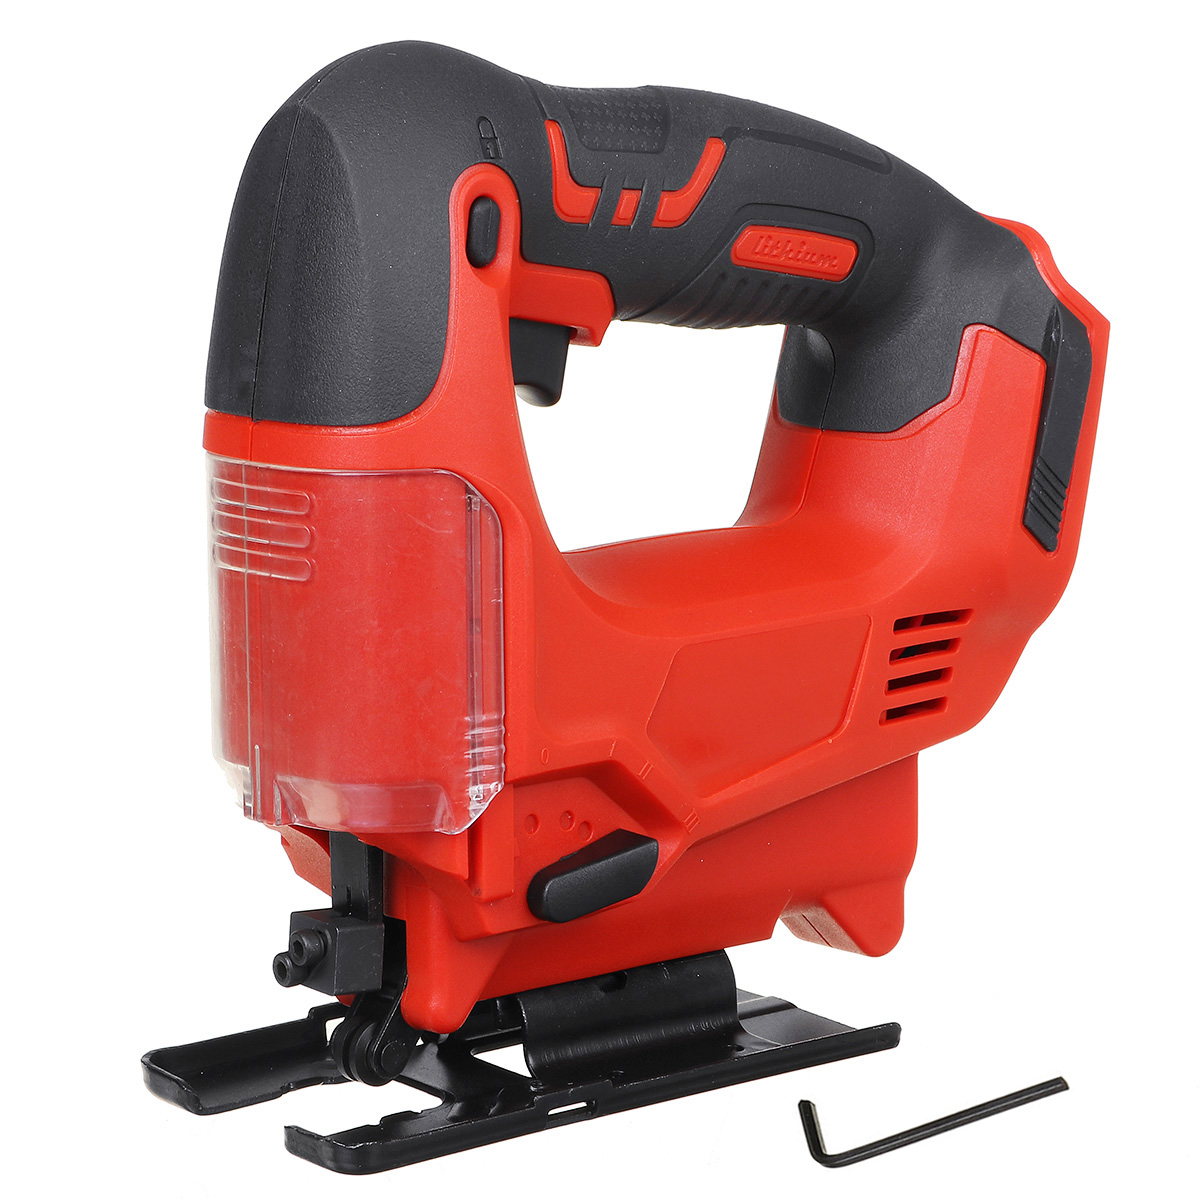 Drillpro-2900RPM-Electric-Jig-Saw-Cordless-Quick-Blade-Change-Saw-Power-Tool-4-Adjustable-Cutting-An-1859334-11